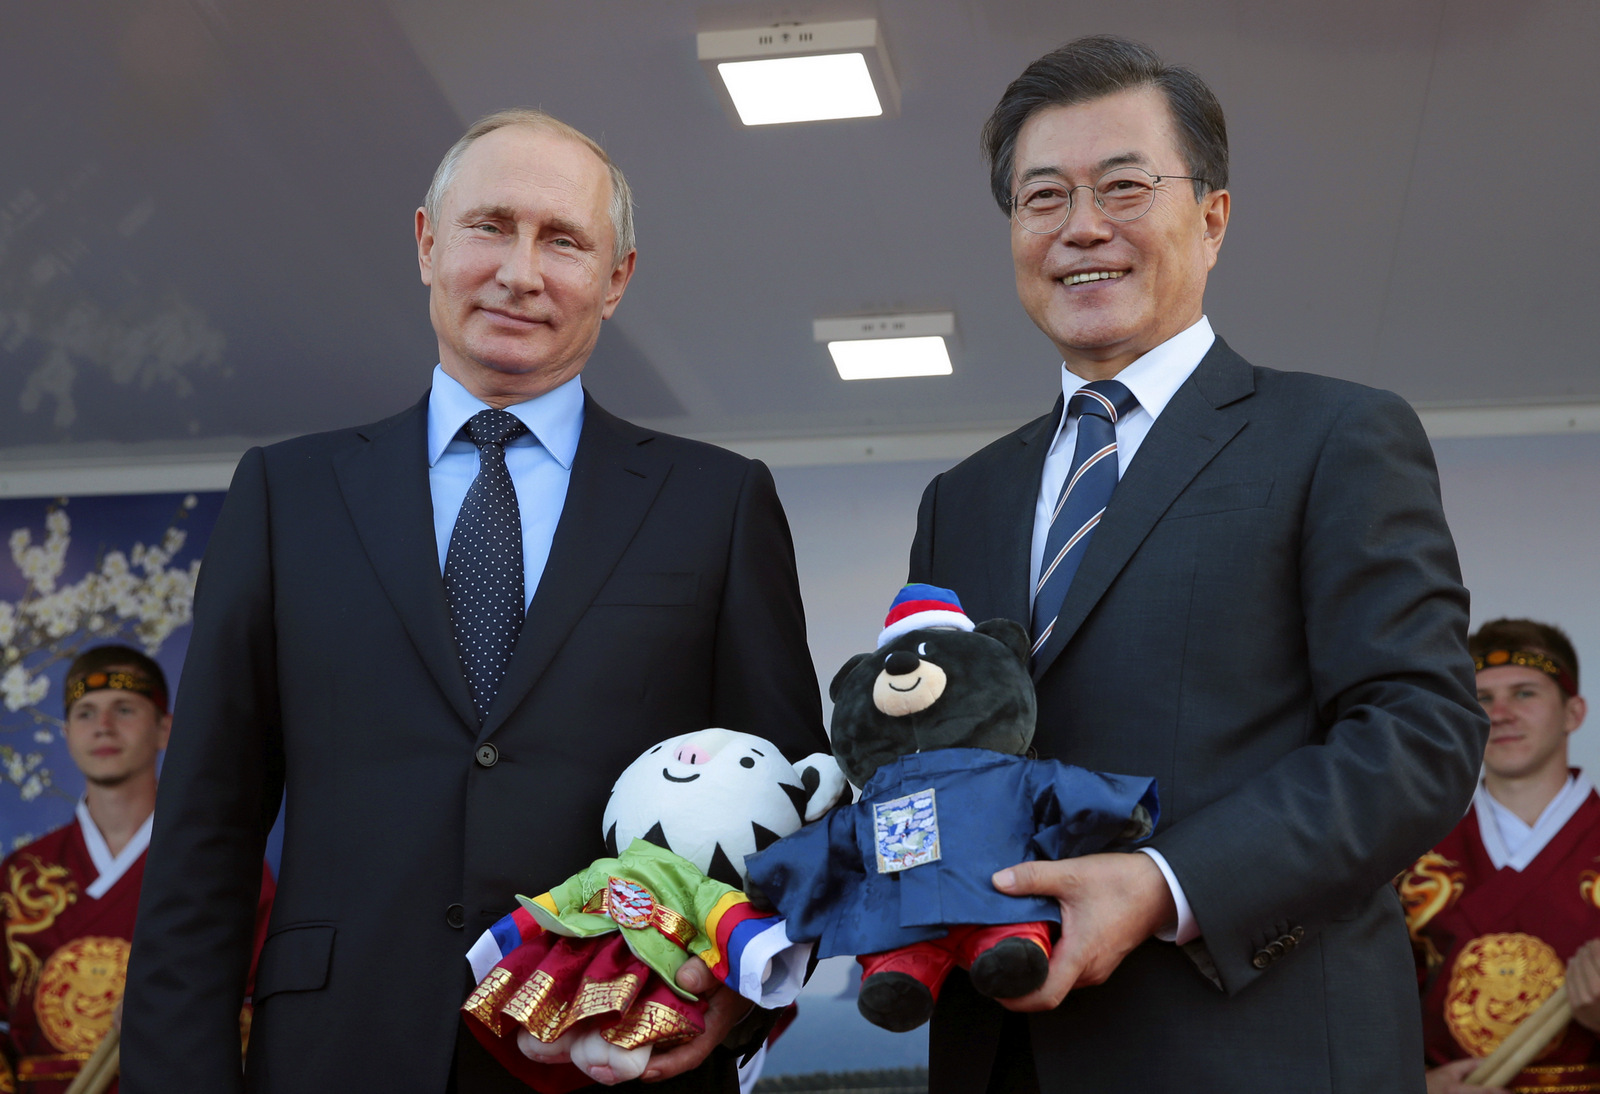 Russian President Vladimir Putin, left, and his South Korean counterpart Moon Jae-in smile and hold stuffed animals representing the 2018 and 2014 Winter Olympics at the Eastern Economic Forum in Vladivostok, Russia, on, Sept. 6, 2017. (Mikhail Metzel/TASS via AP)